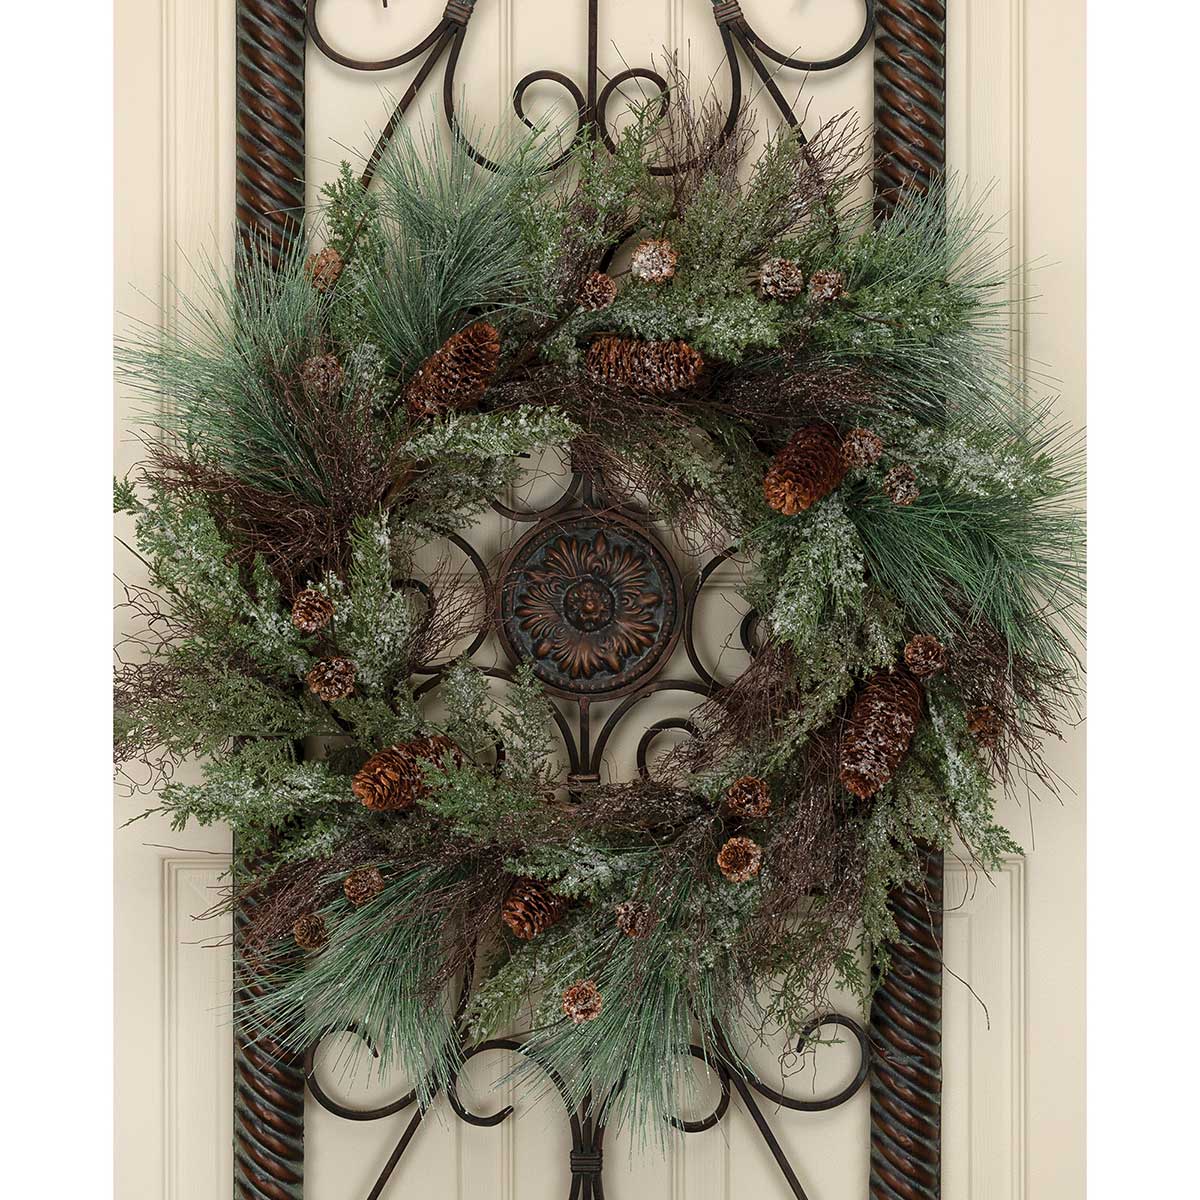 FROSTED LONG NEEDLE PINE WREATH WITH CEDAR, PINECONES